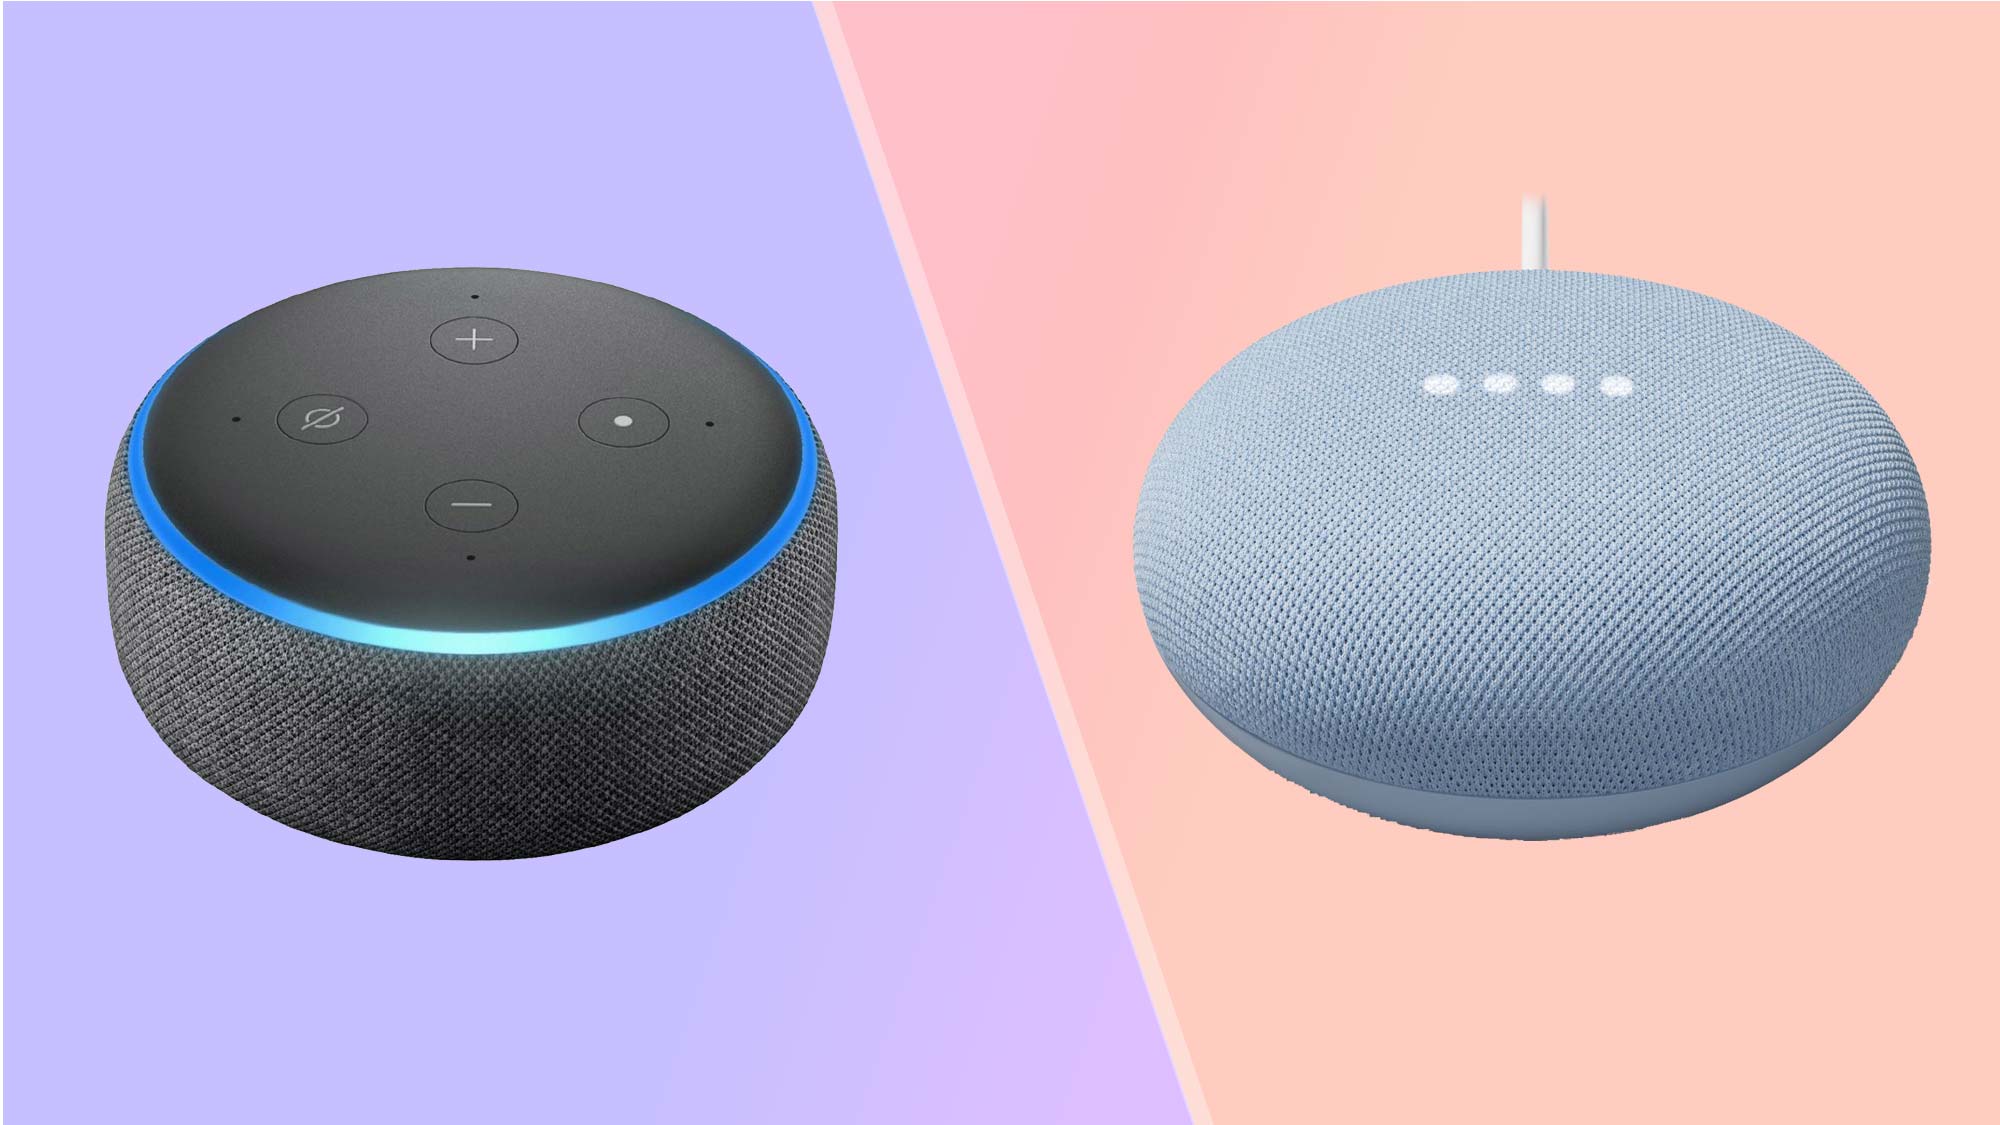 How To Make Alexa And Google Talk To Each Other